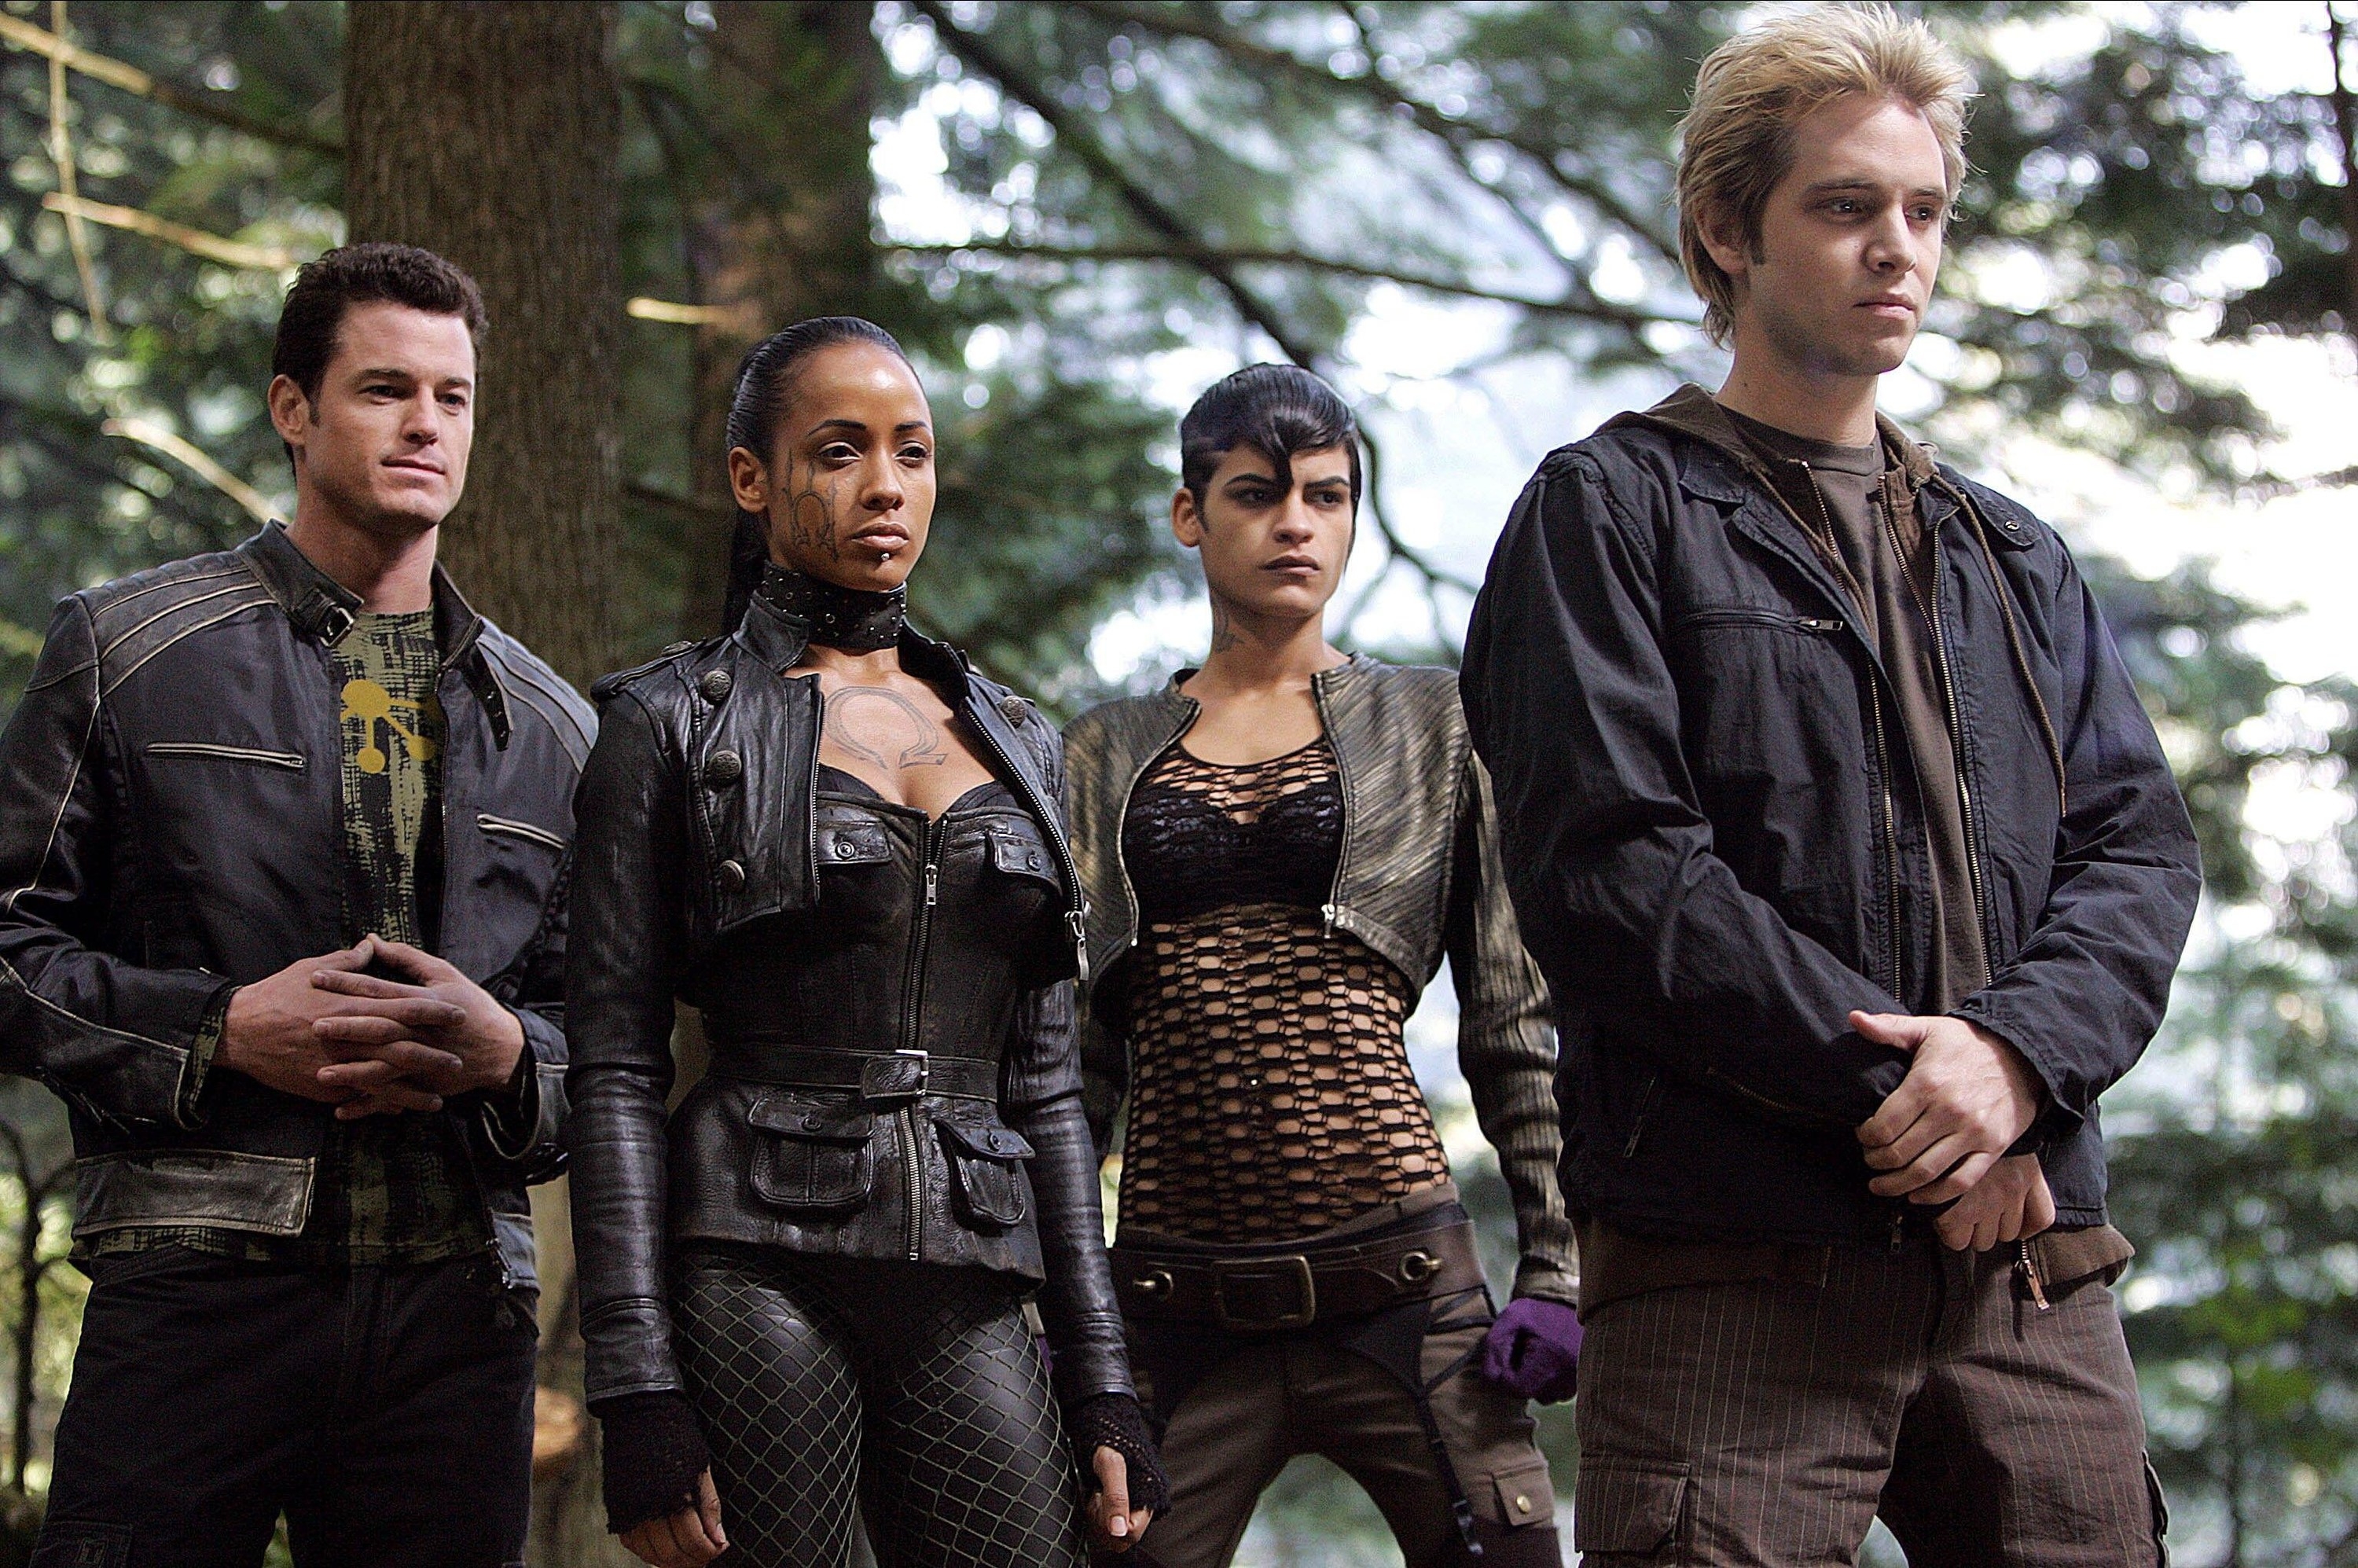 A brooding Pyro leads a group of Morlocks in &quot;X-Men: The Last Stand&quot;